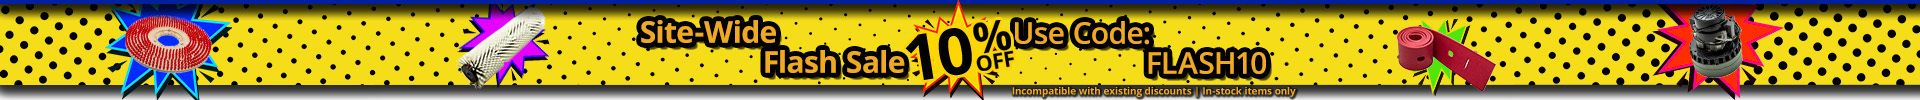 Site-Wide Flash Sale - 10% Off! Use code FLASH10 at checkout. Some exceptions apply. 